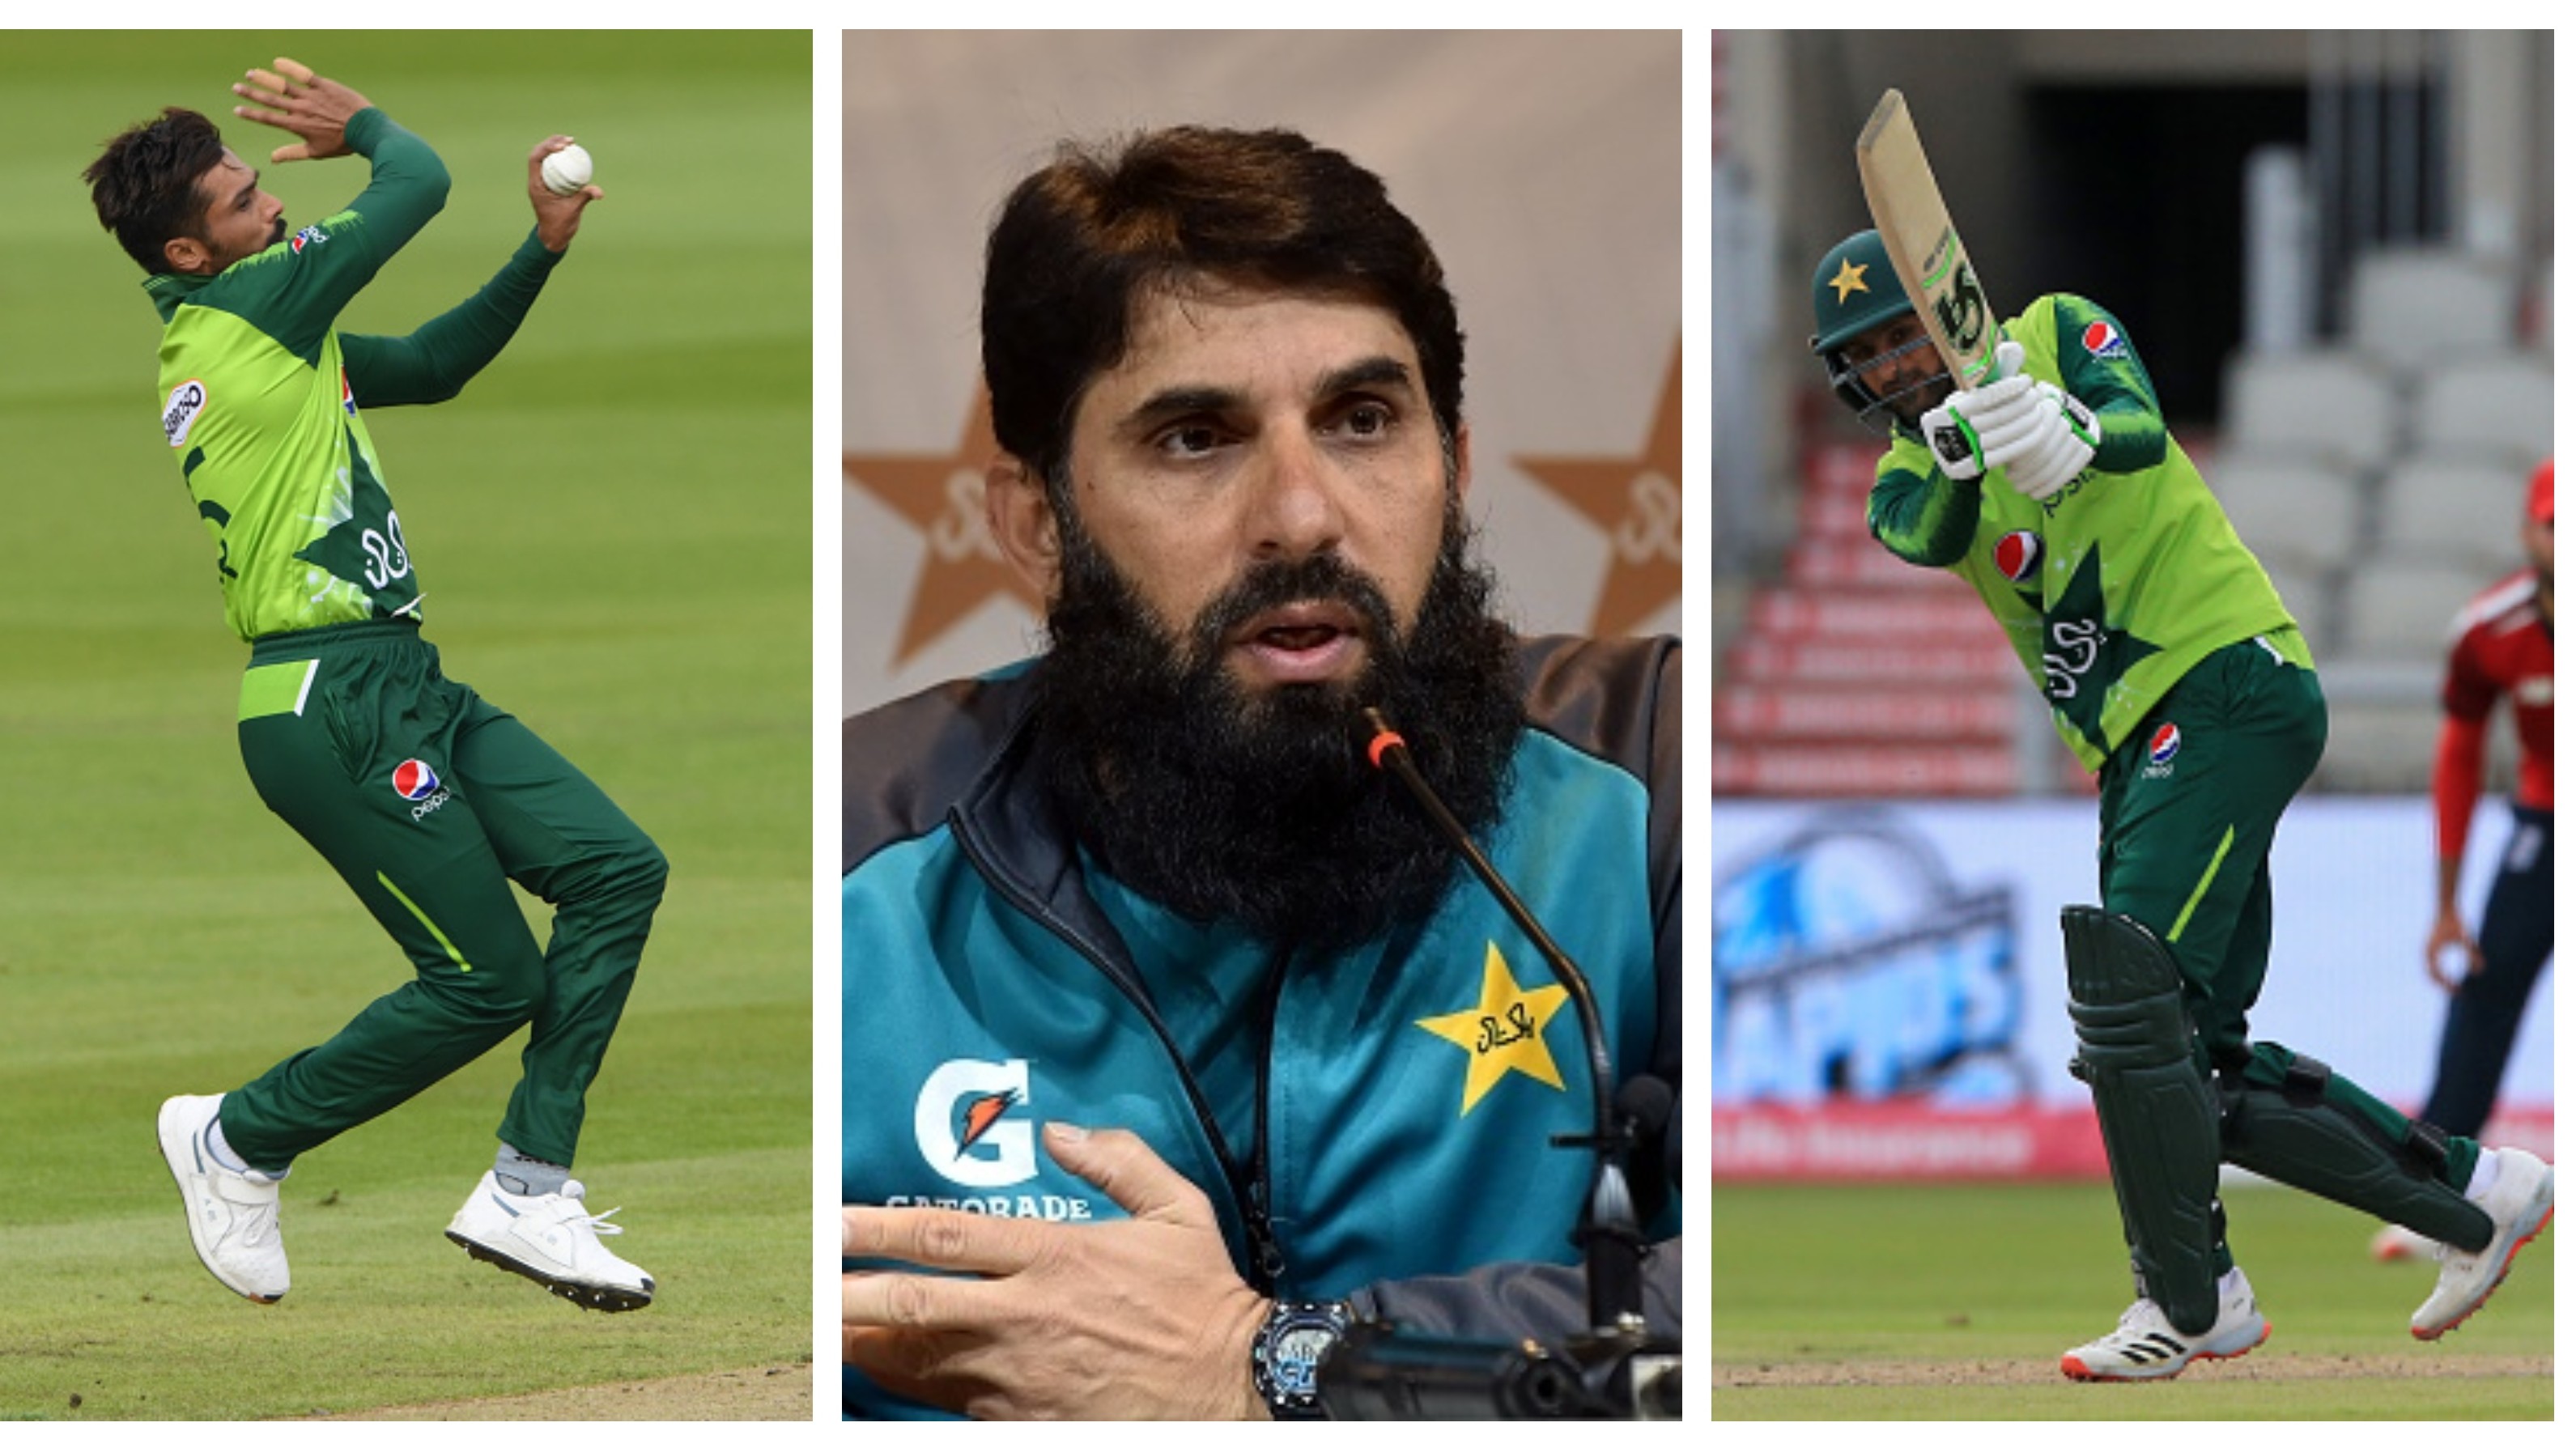 NZ v PAK 2020-21: Misbah says Malik, Amir dropped as Pakistan look to focus on young talent